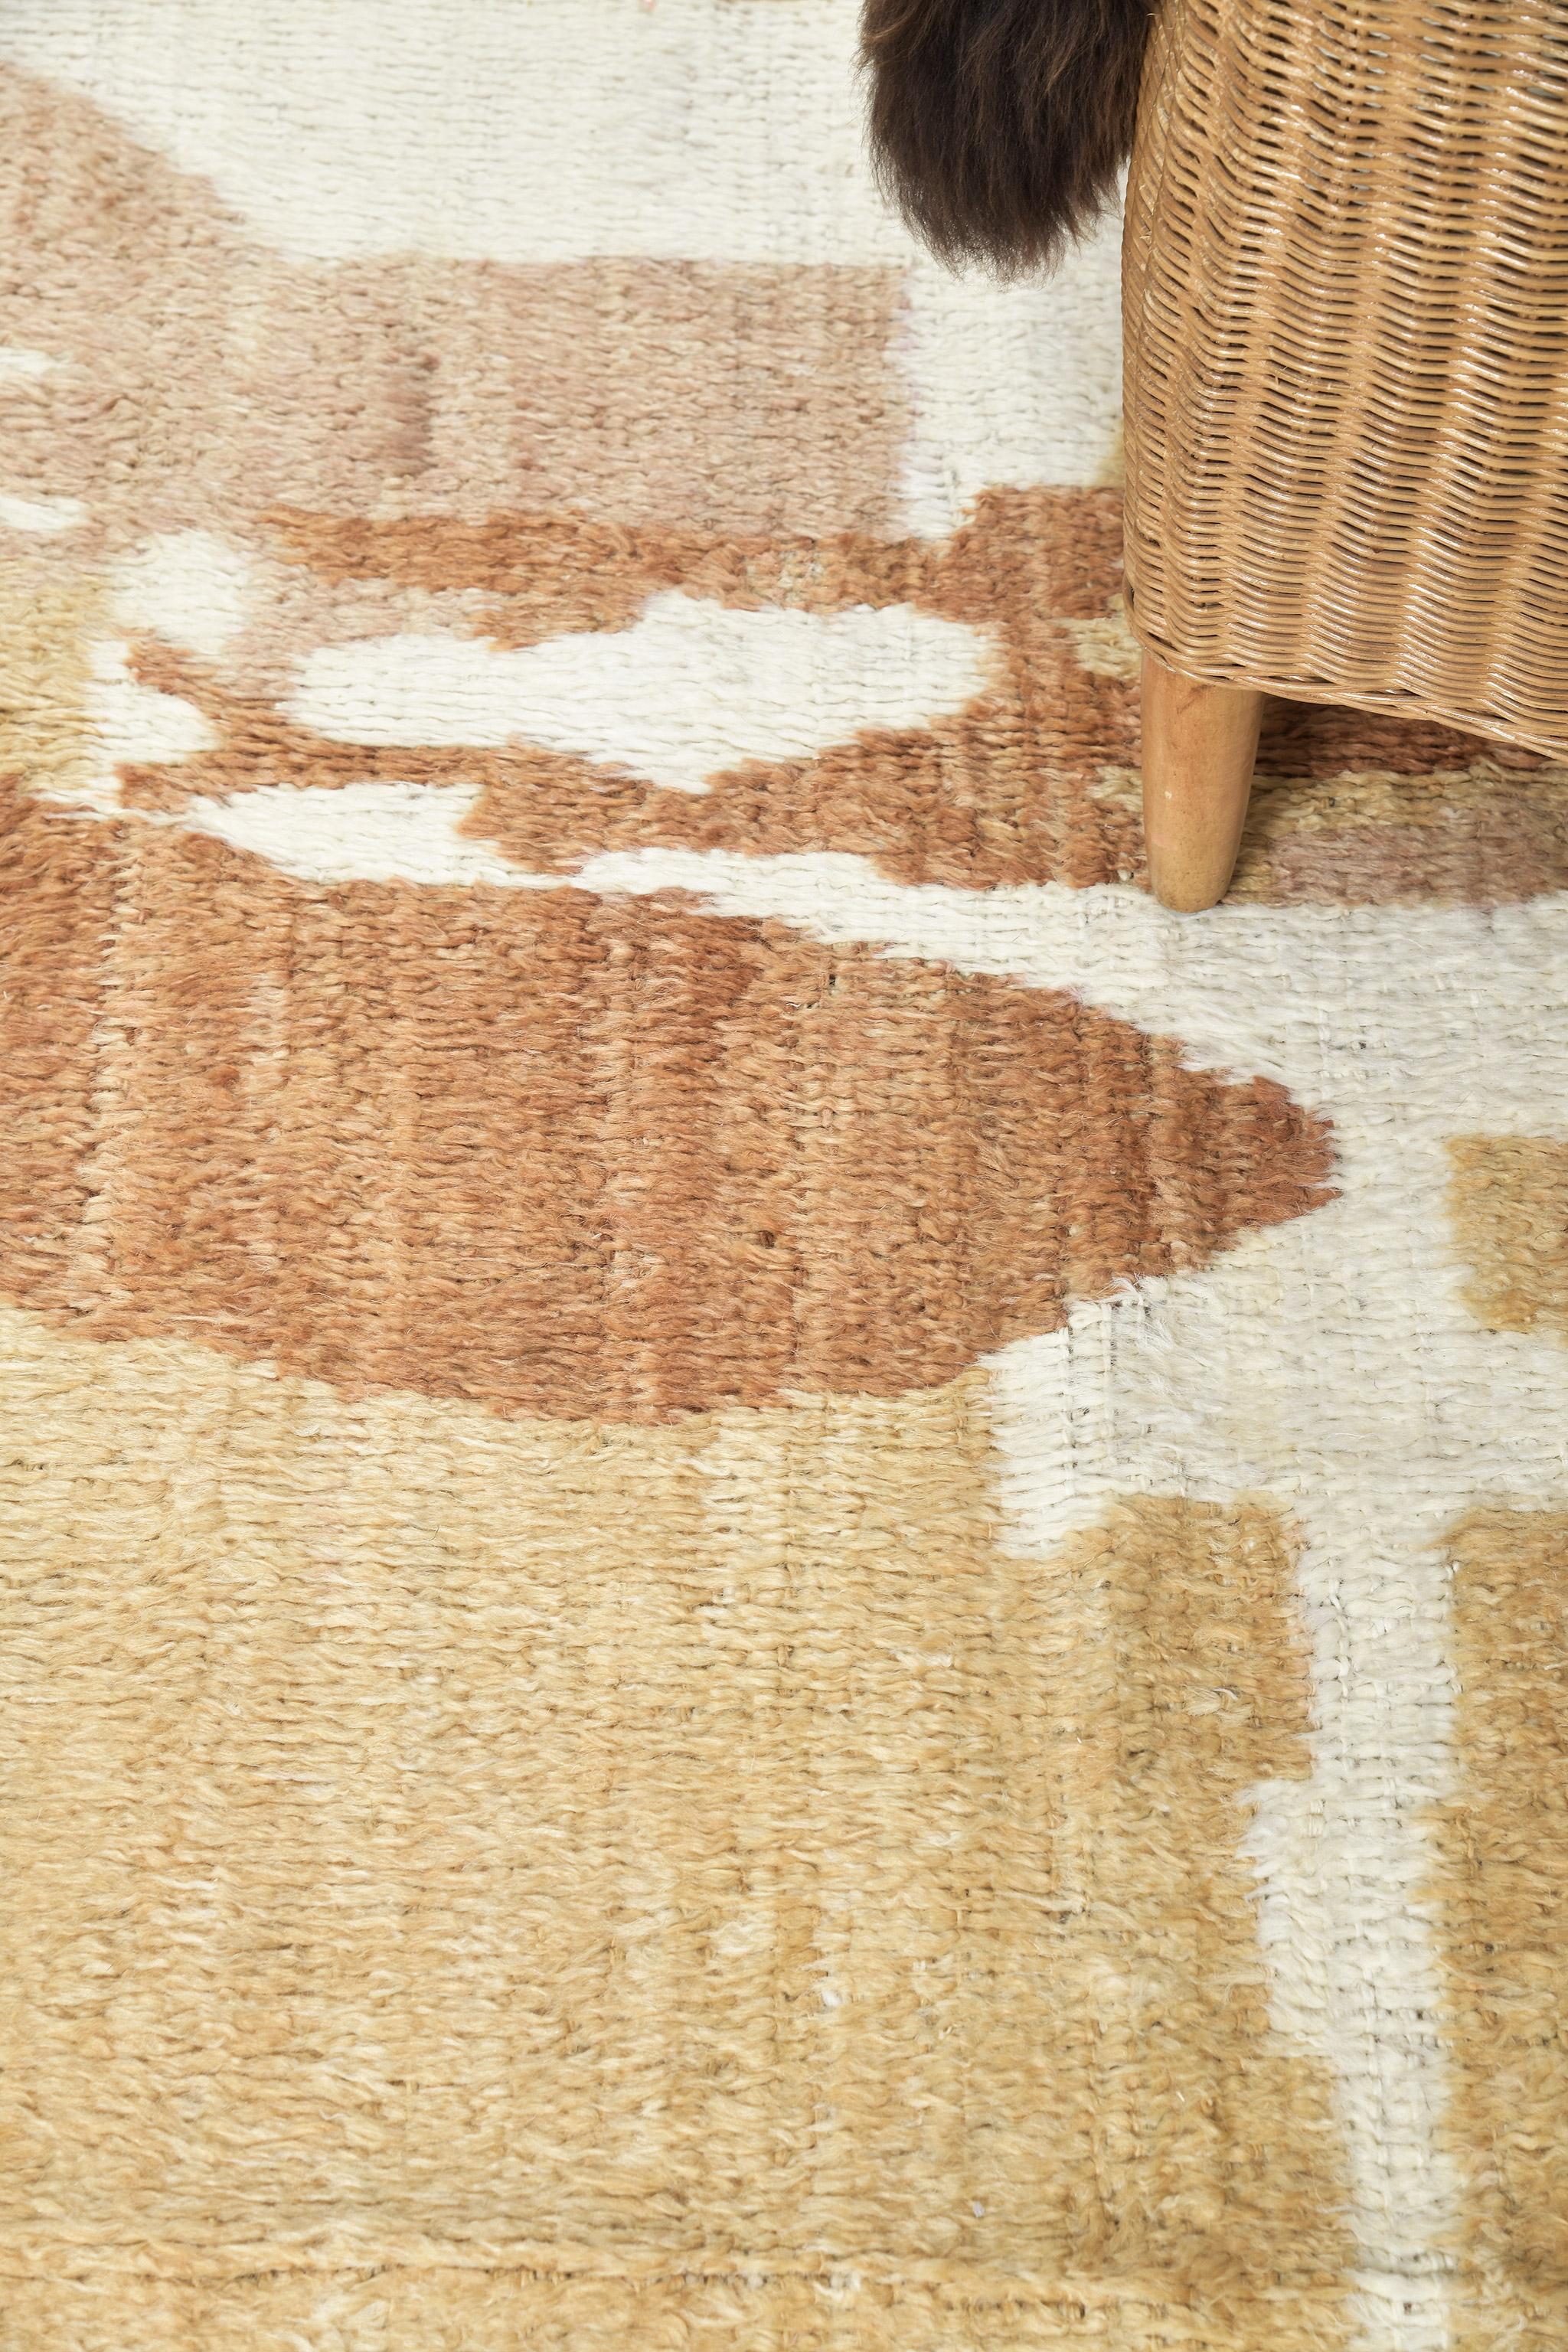 Tazekka' is made of luxurious wool and is made of timeless design elements. Its weaving of natural earth tones with vibrant colors and unique design is what makes the Atlas Collection so unique and sought after.

Rug Number
30592
Size
9' 3